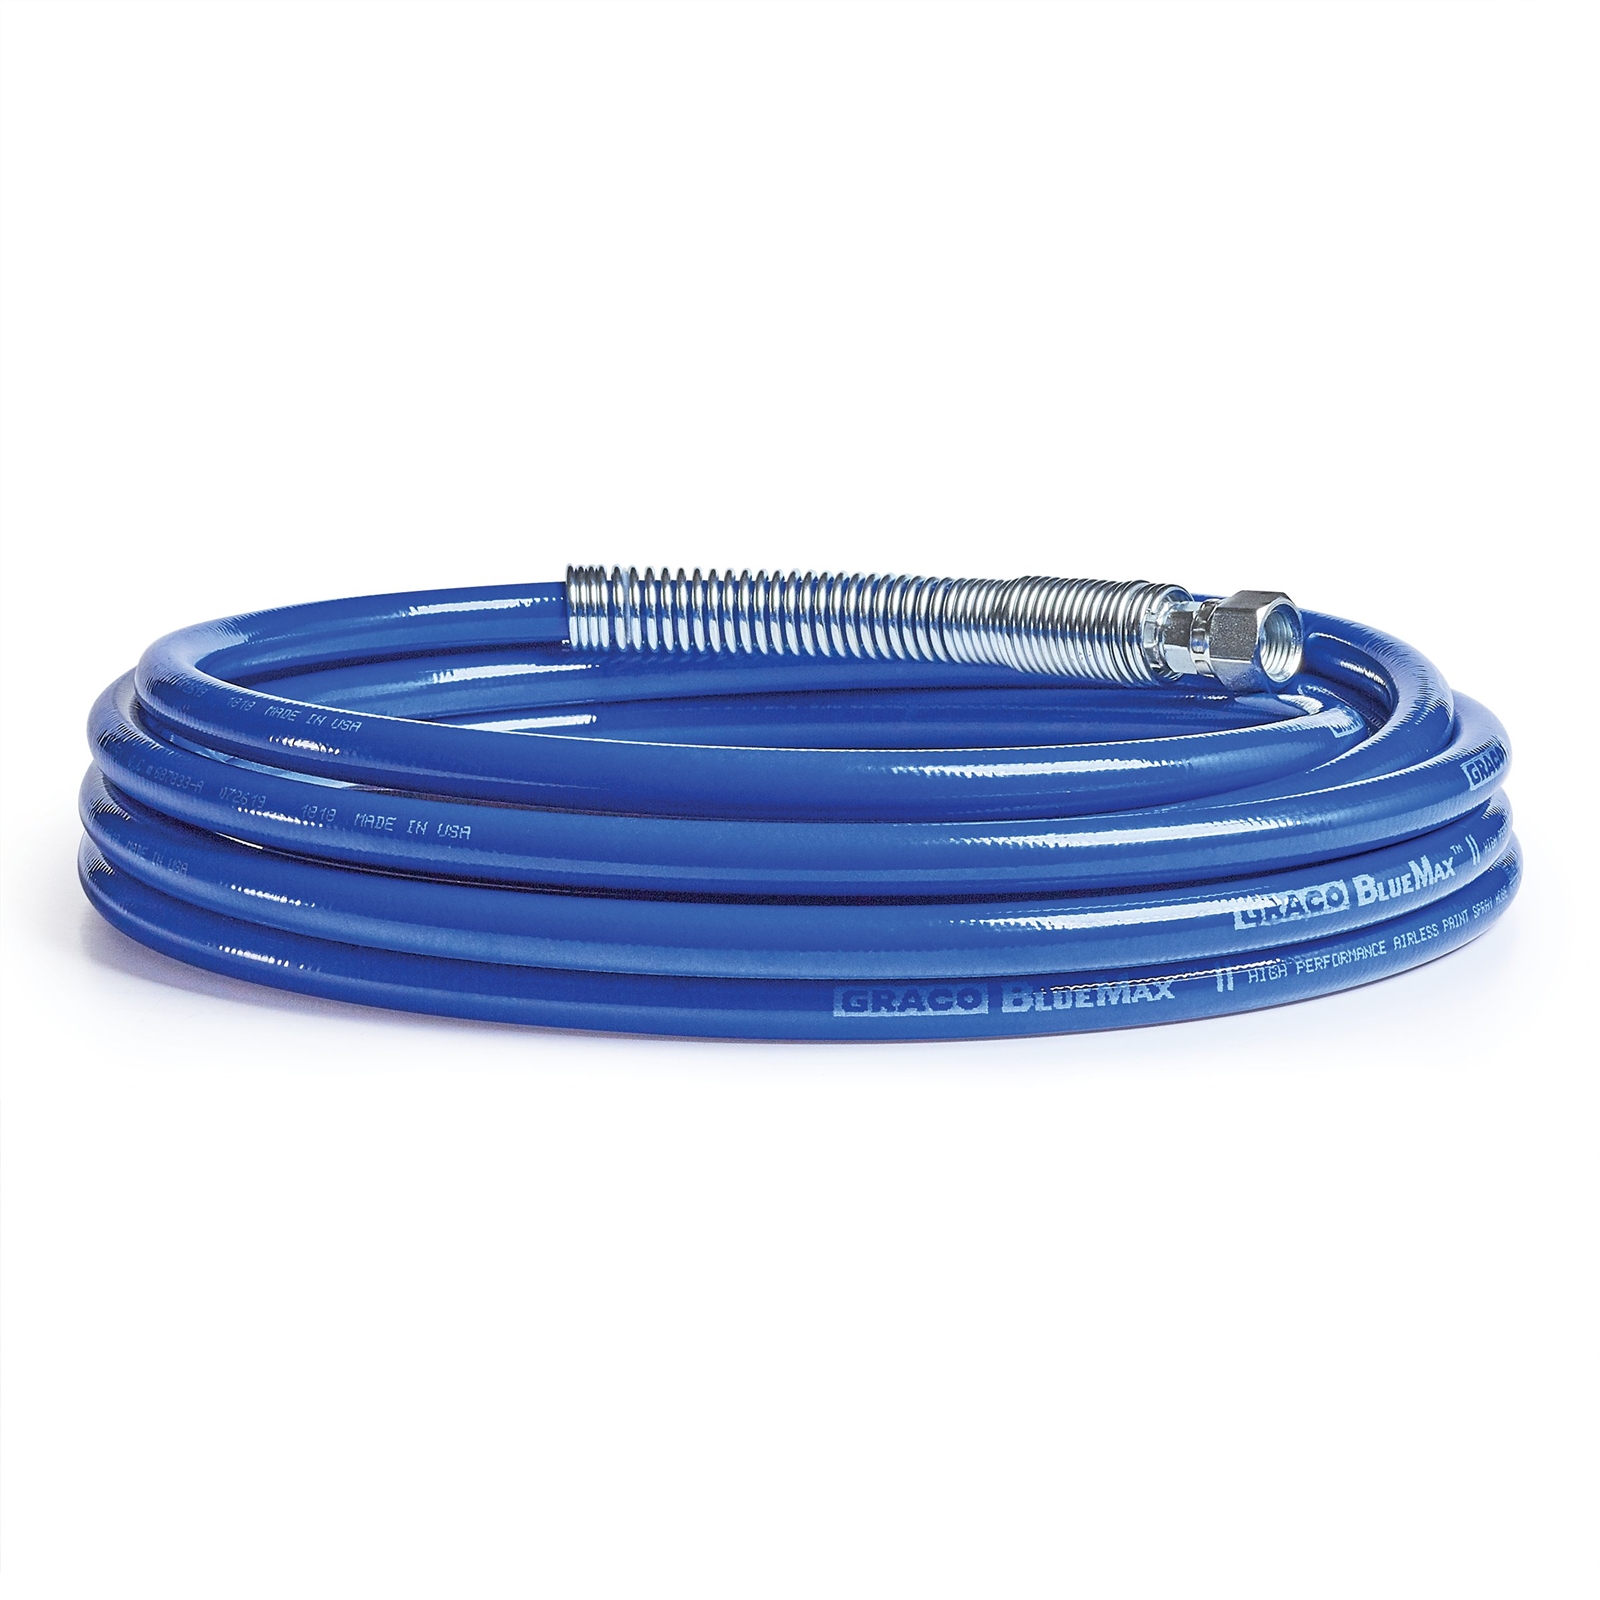 Graco Graco Airless Paint Hose 50X1/4 In Corrosion Resistant Minimal Zinc Plated Blue 